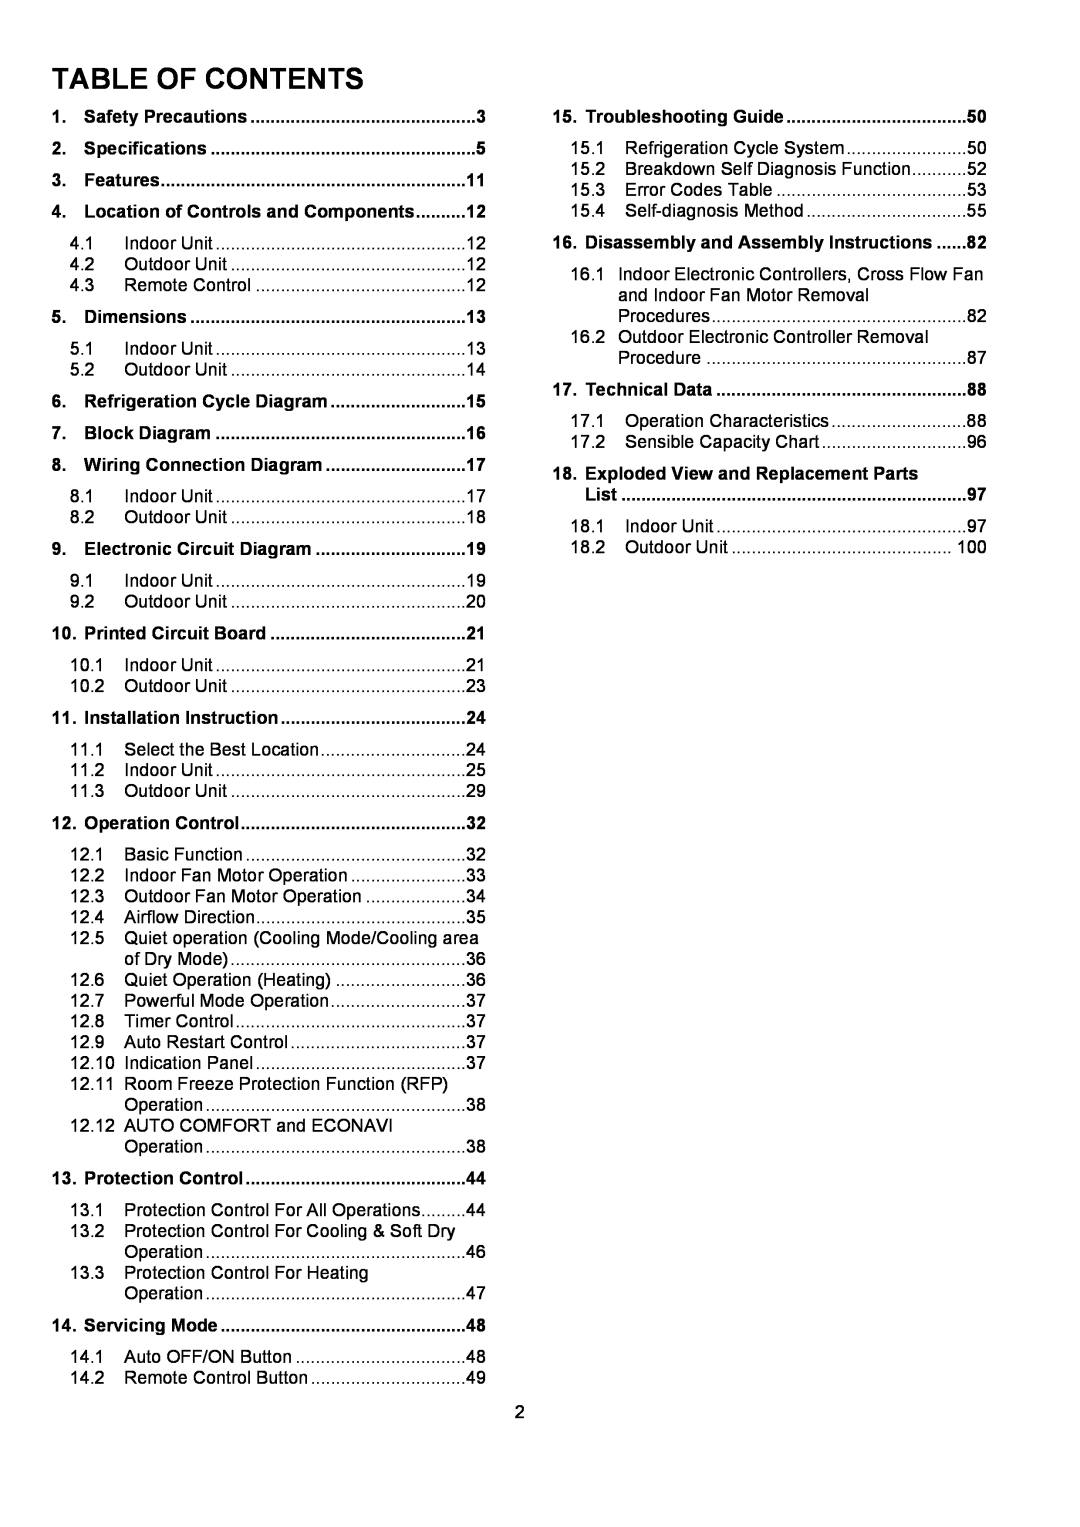 Panasonic CU-XE9PKUA Table Of Contents, Location of Controls and Components, Disassembly and Assembly Instructions, List 